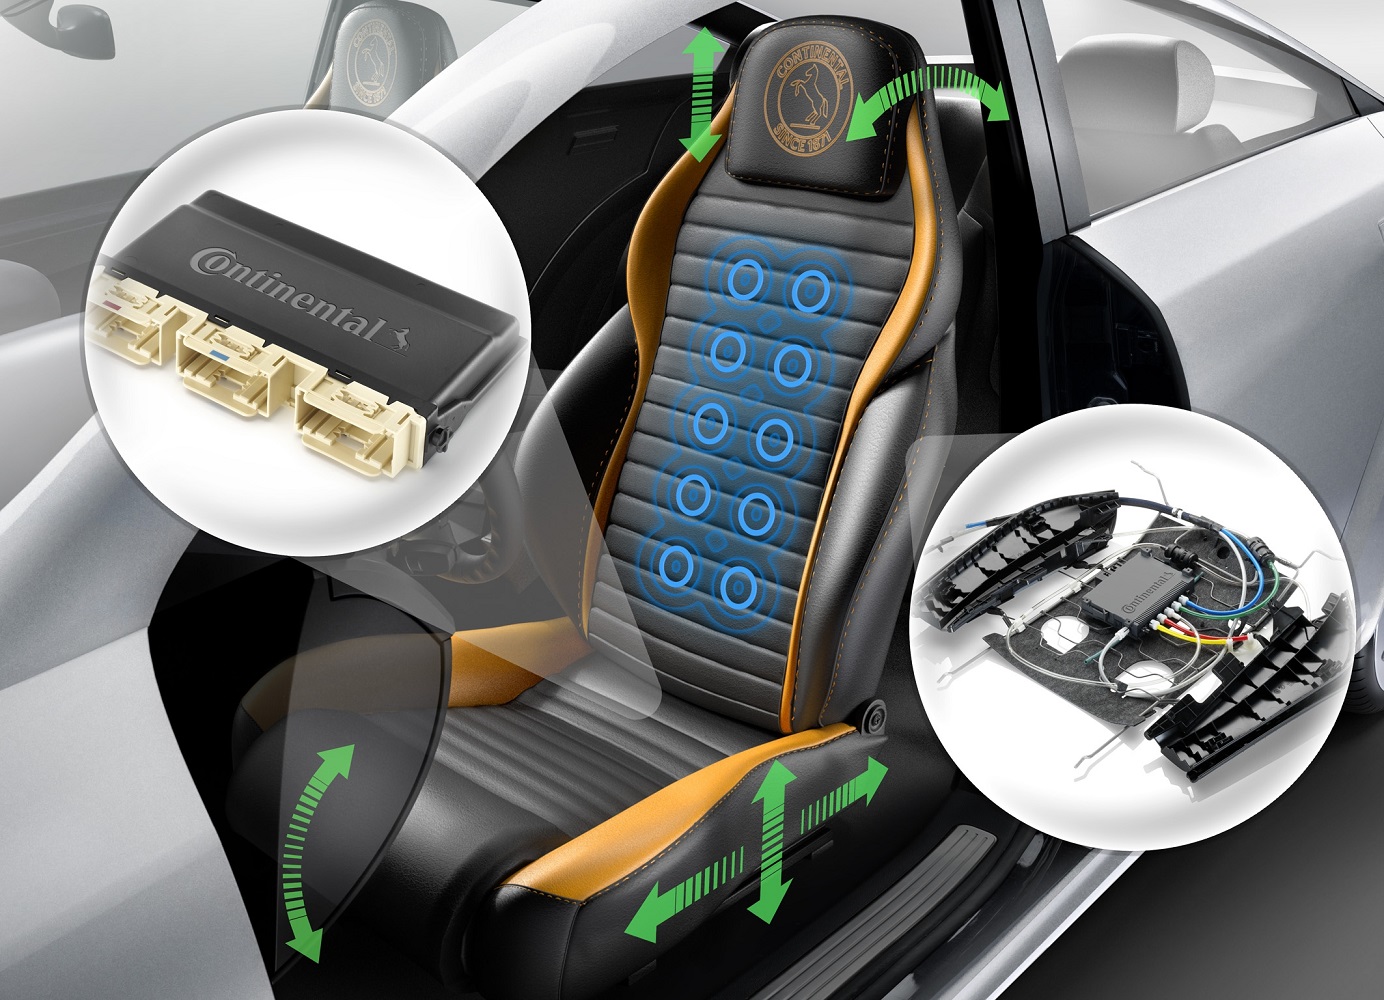 Continental controls for diverse electric seat adjustments